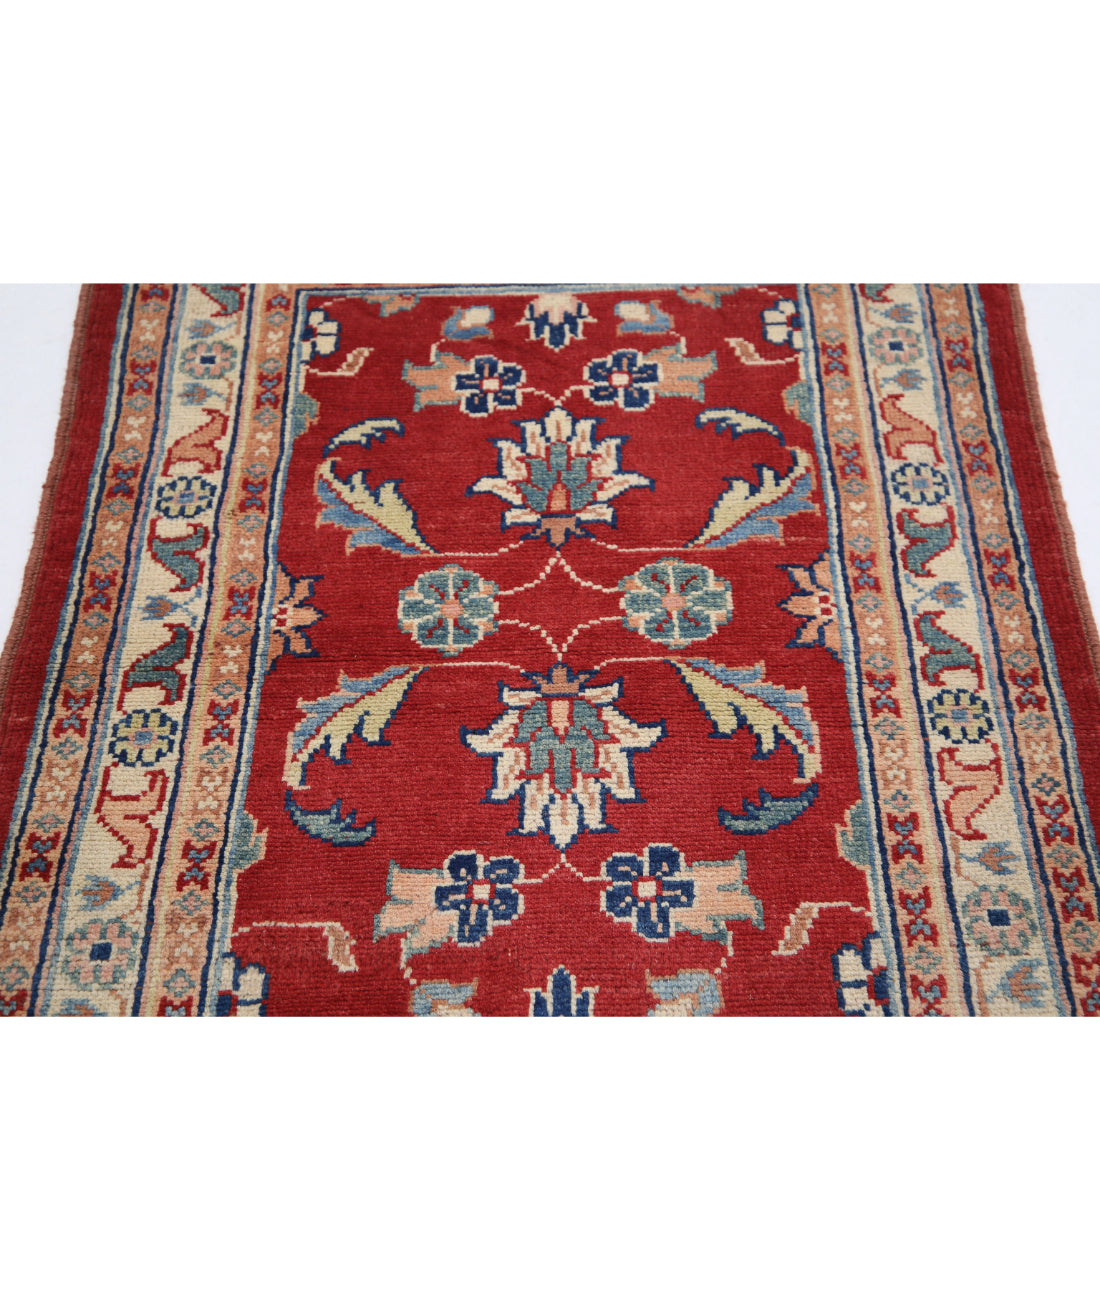 Ziegler 2'9'' X 3'10'' Hand-Knotted Wool Rug 2'9'' x 3'10'' (83 X 115) / Red / N/A